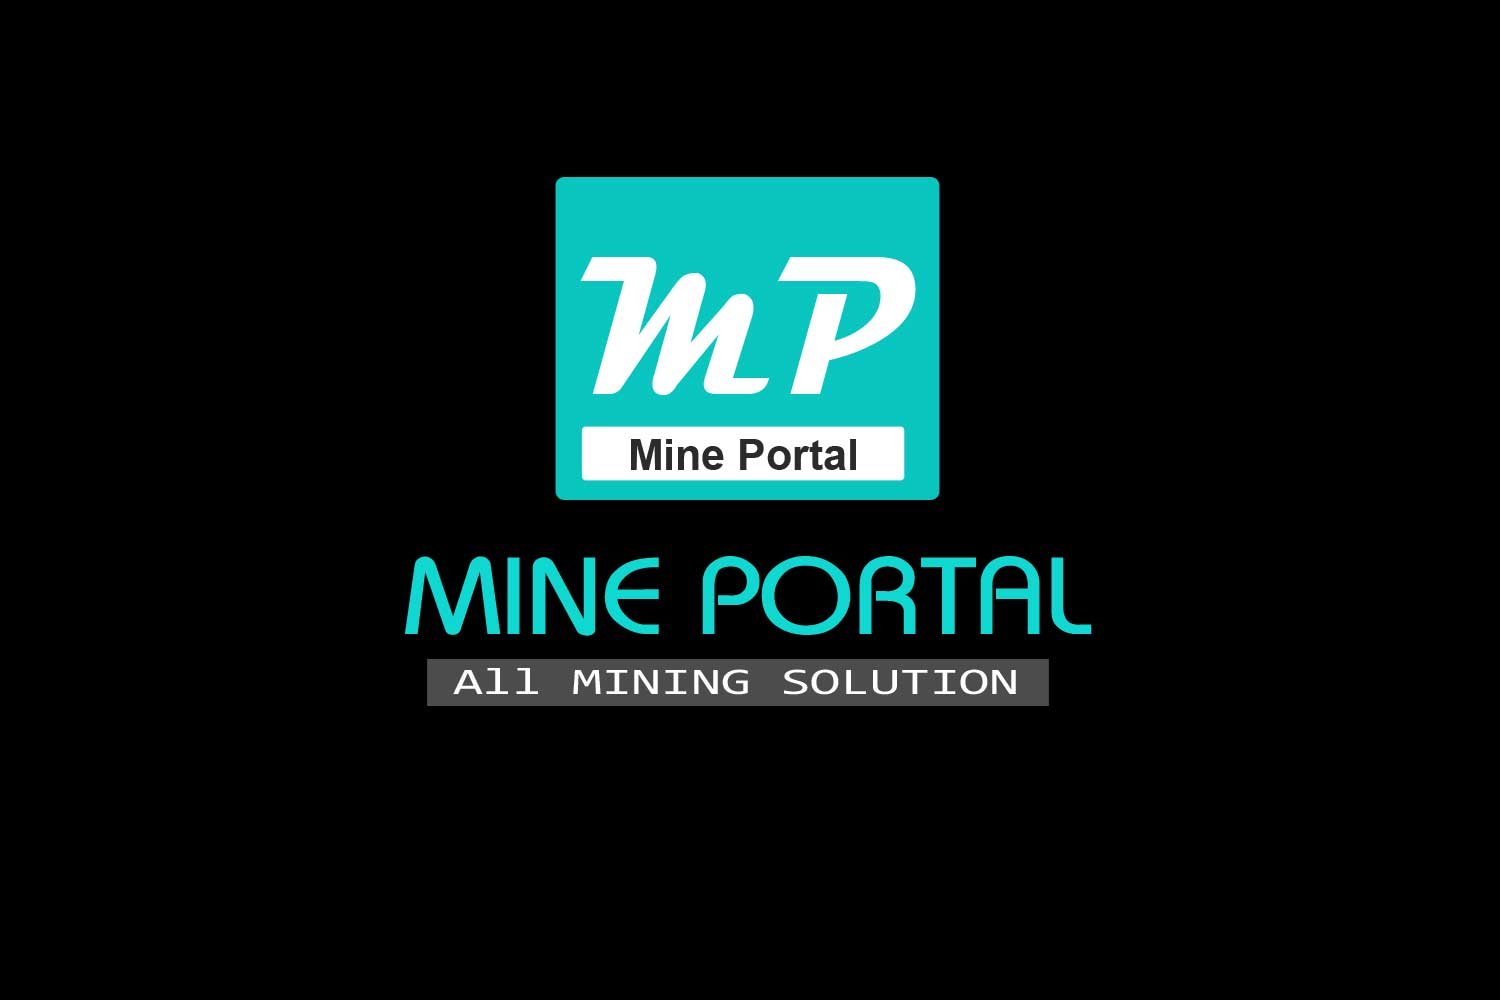 GATE MINING-2022 MARKS v/s RANK CATEGORYWISE